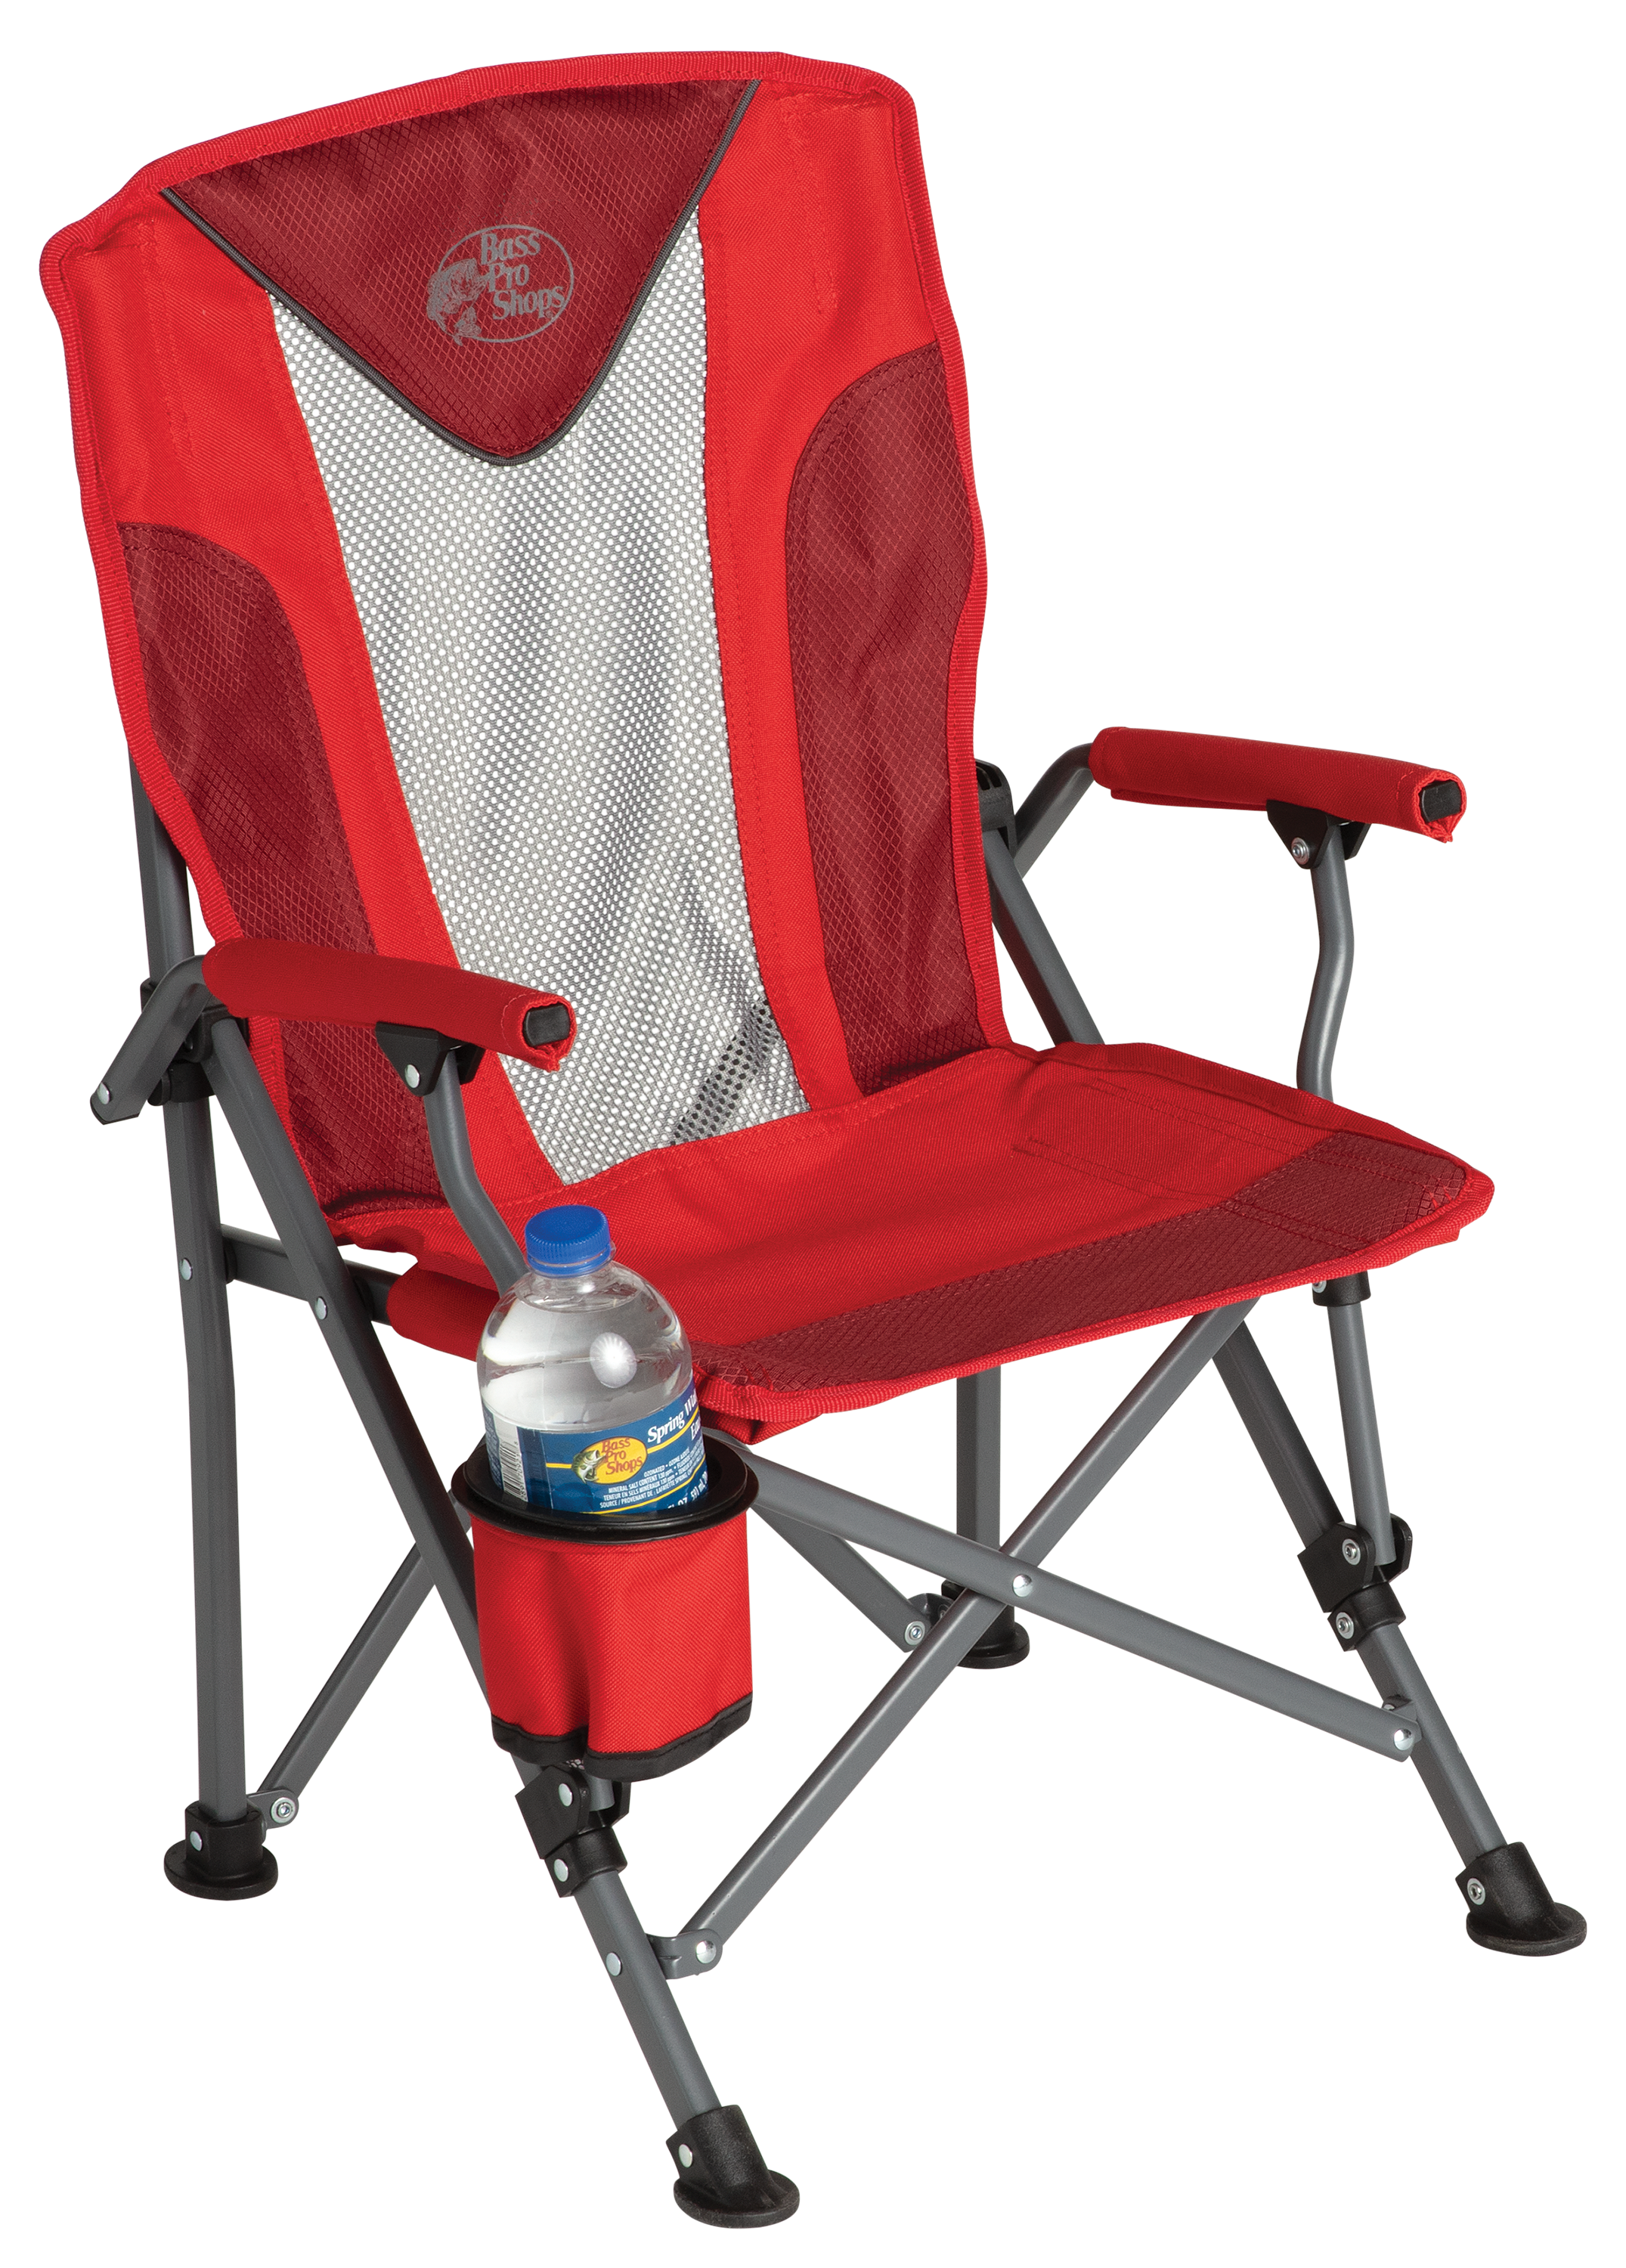 Bass Pro Shops Hard Arm Camp Chair for Youth